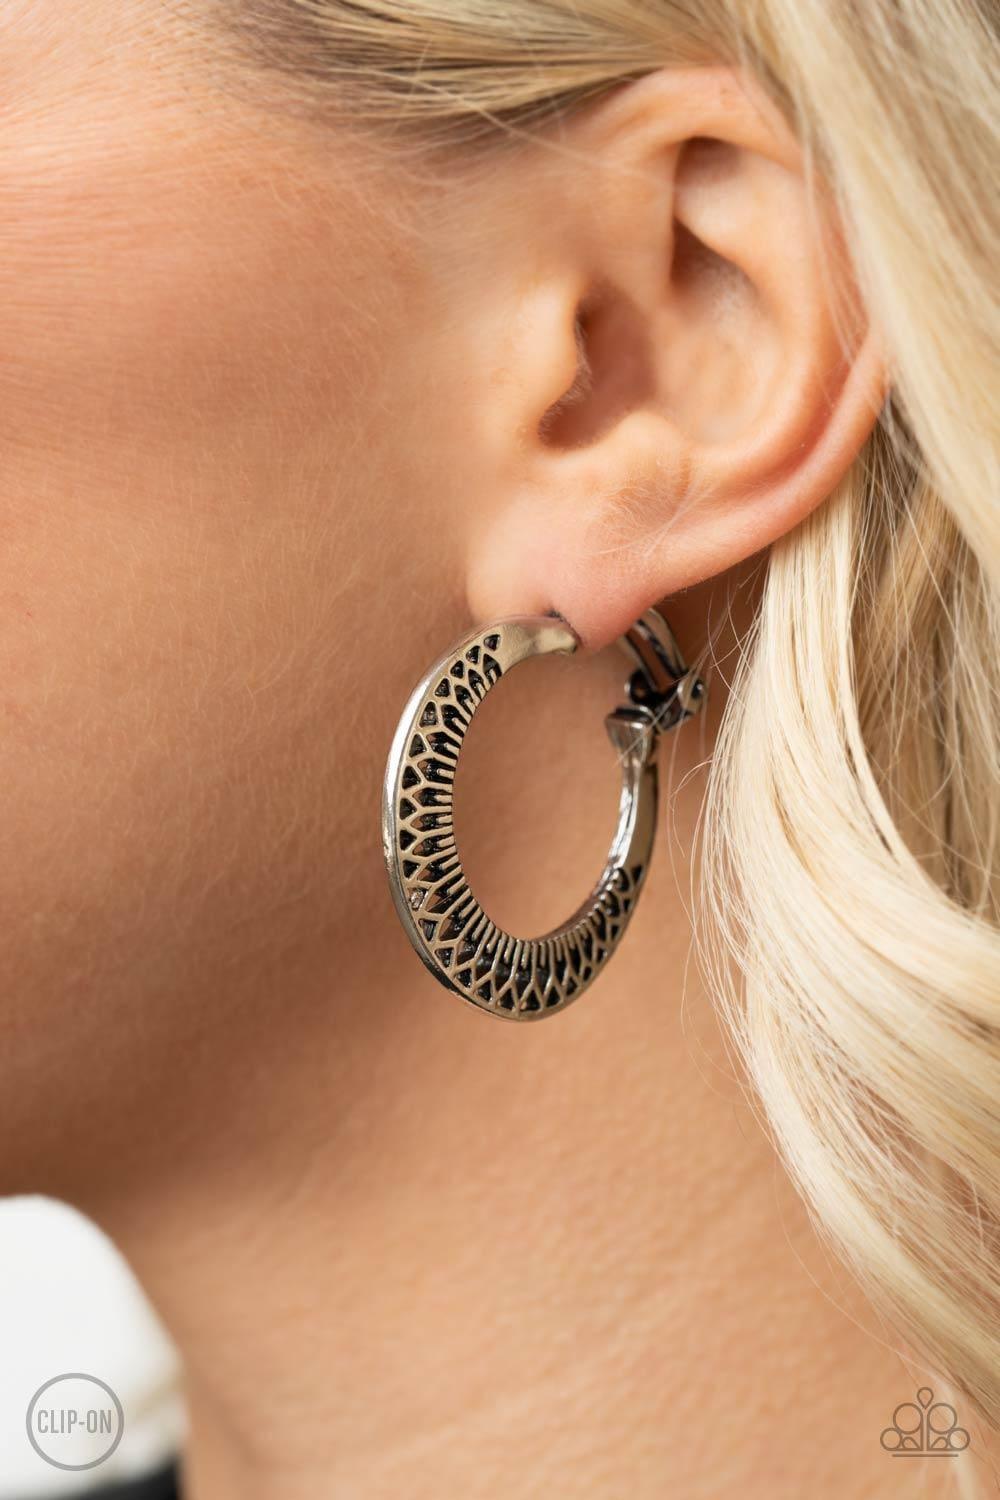 Paparazzi Accessories - Moon Child Charisma - Silver Clip-on Hoops Earrings - Bling by JessieK